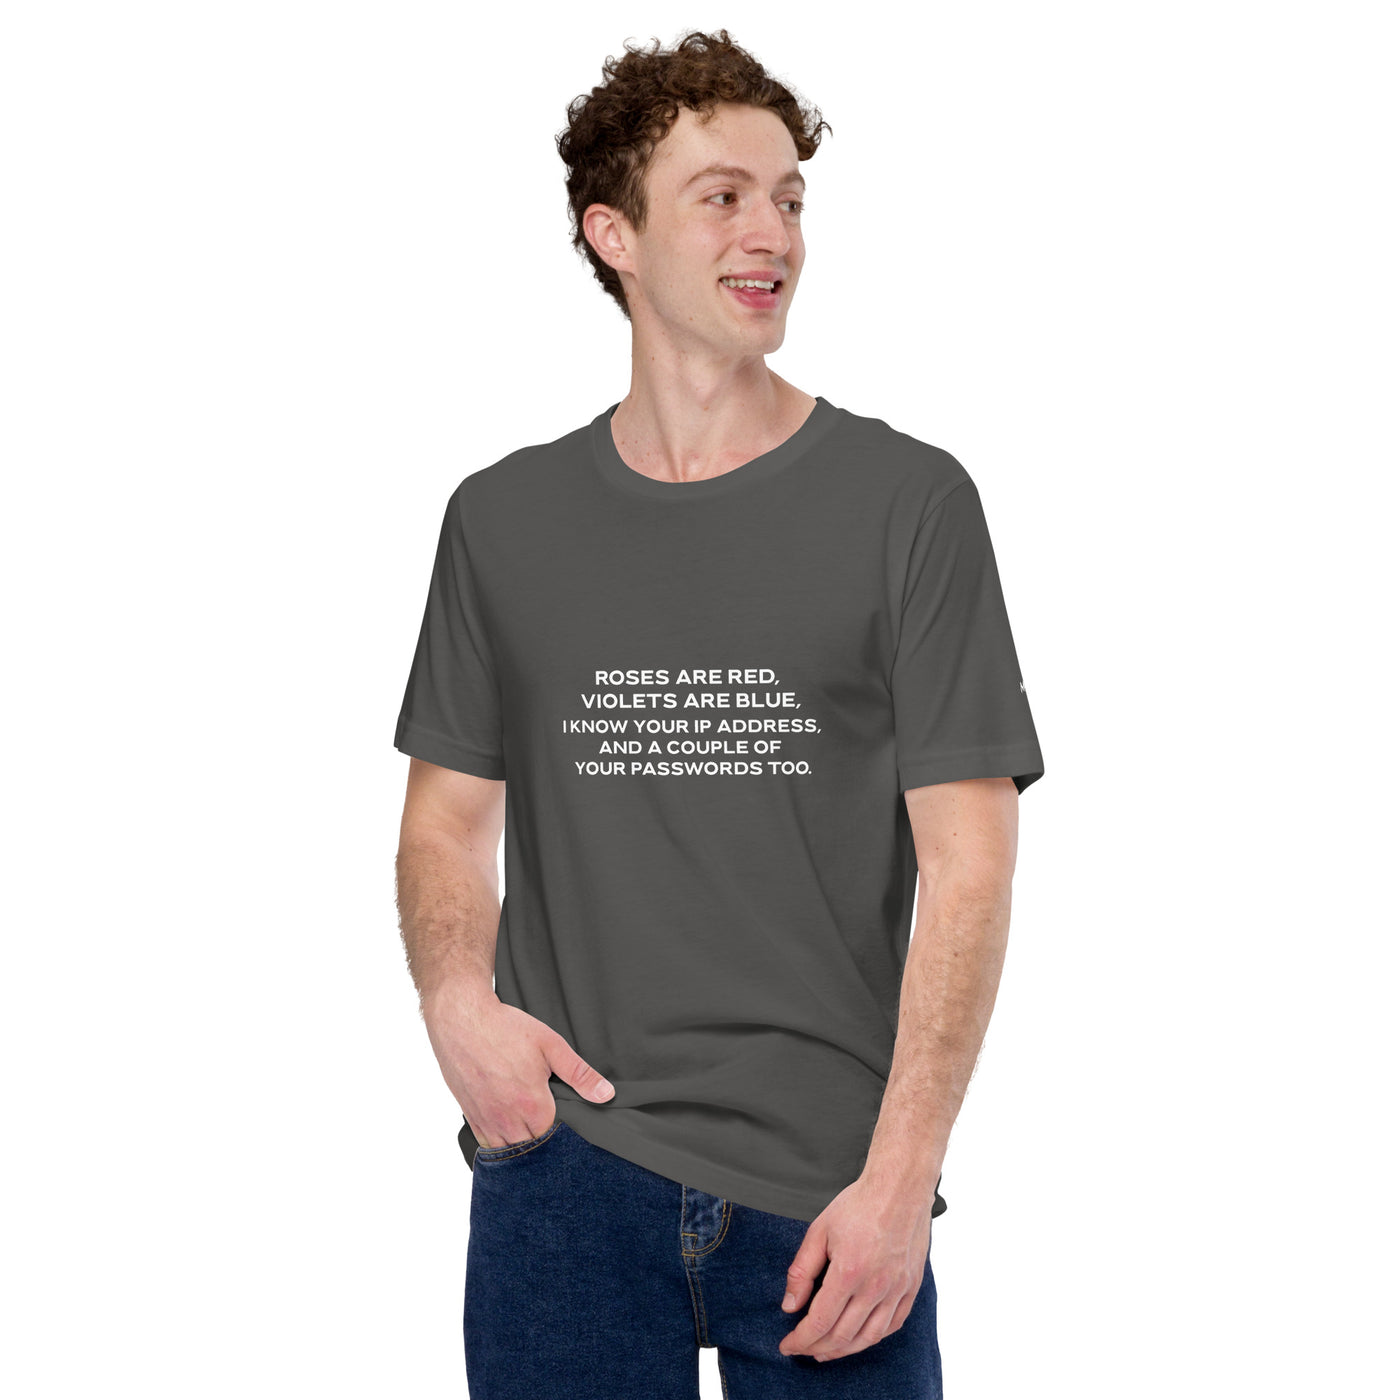 Roses are red, I know your IP and Passwords V1 - Unisex t-shirt